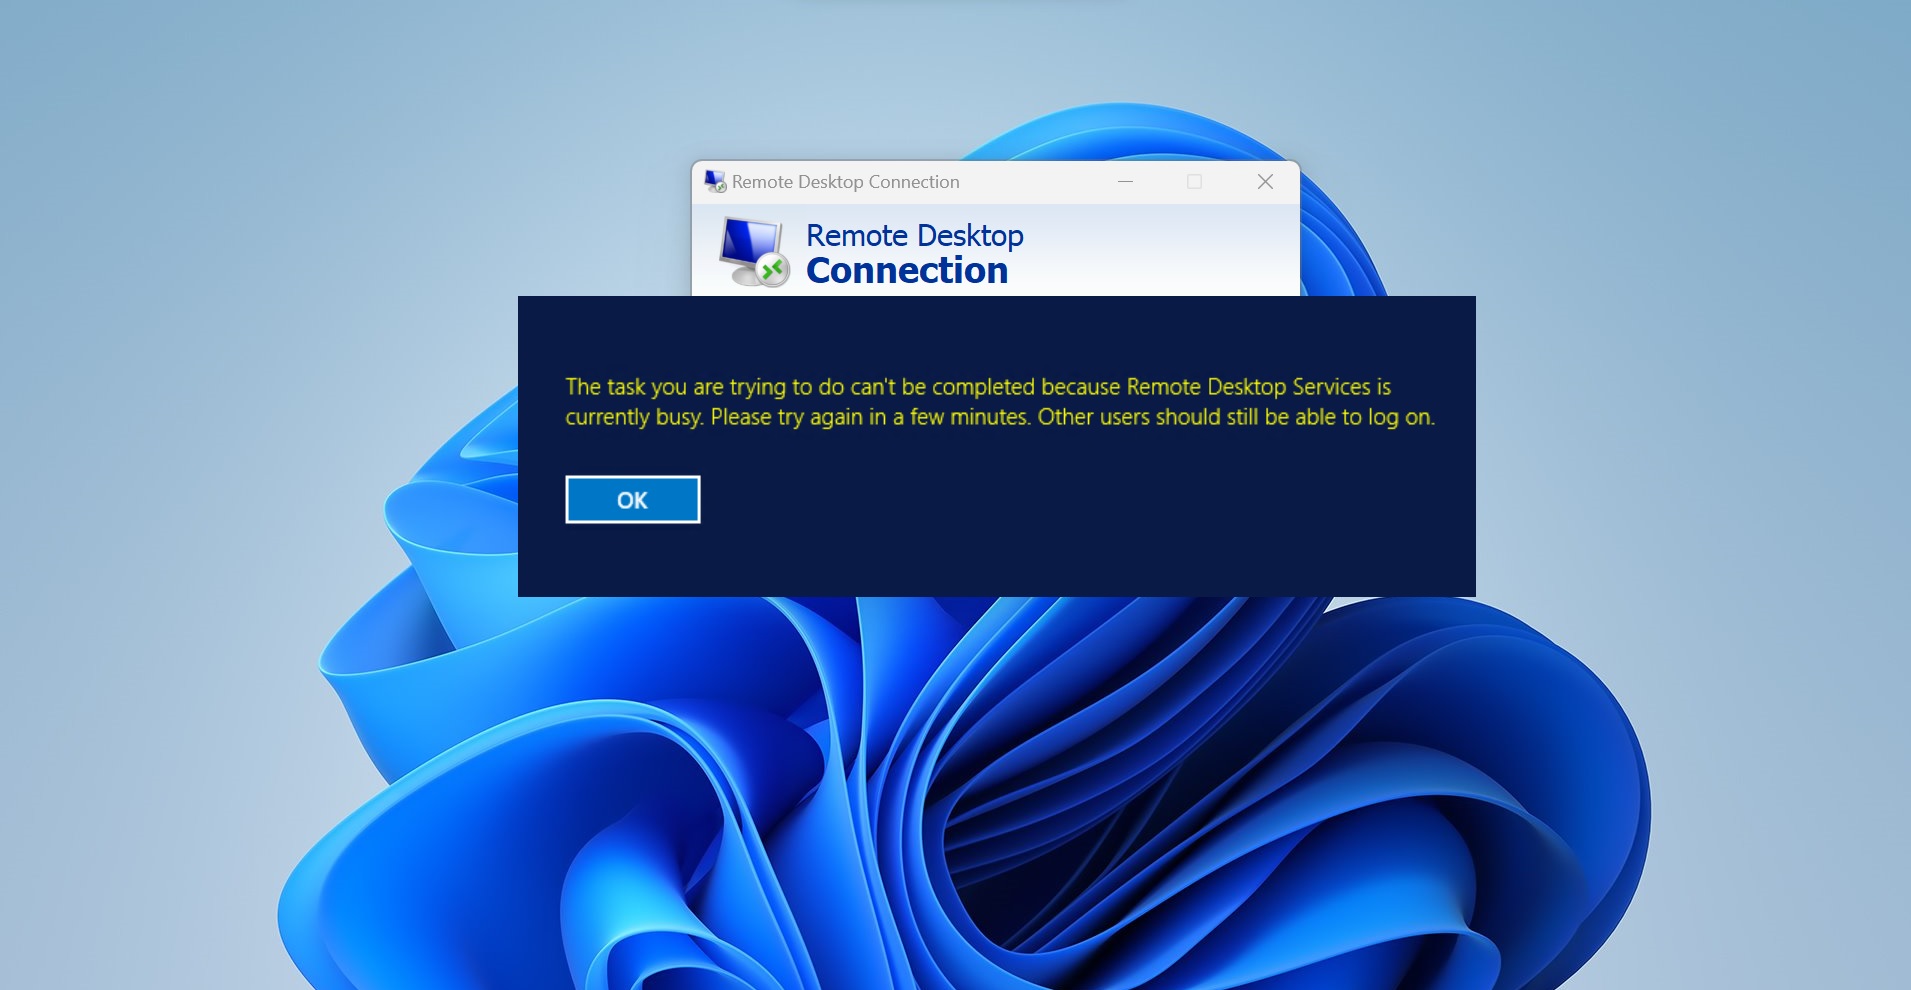 Remote Desktop services is currently busy